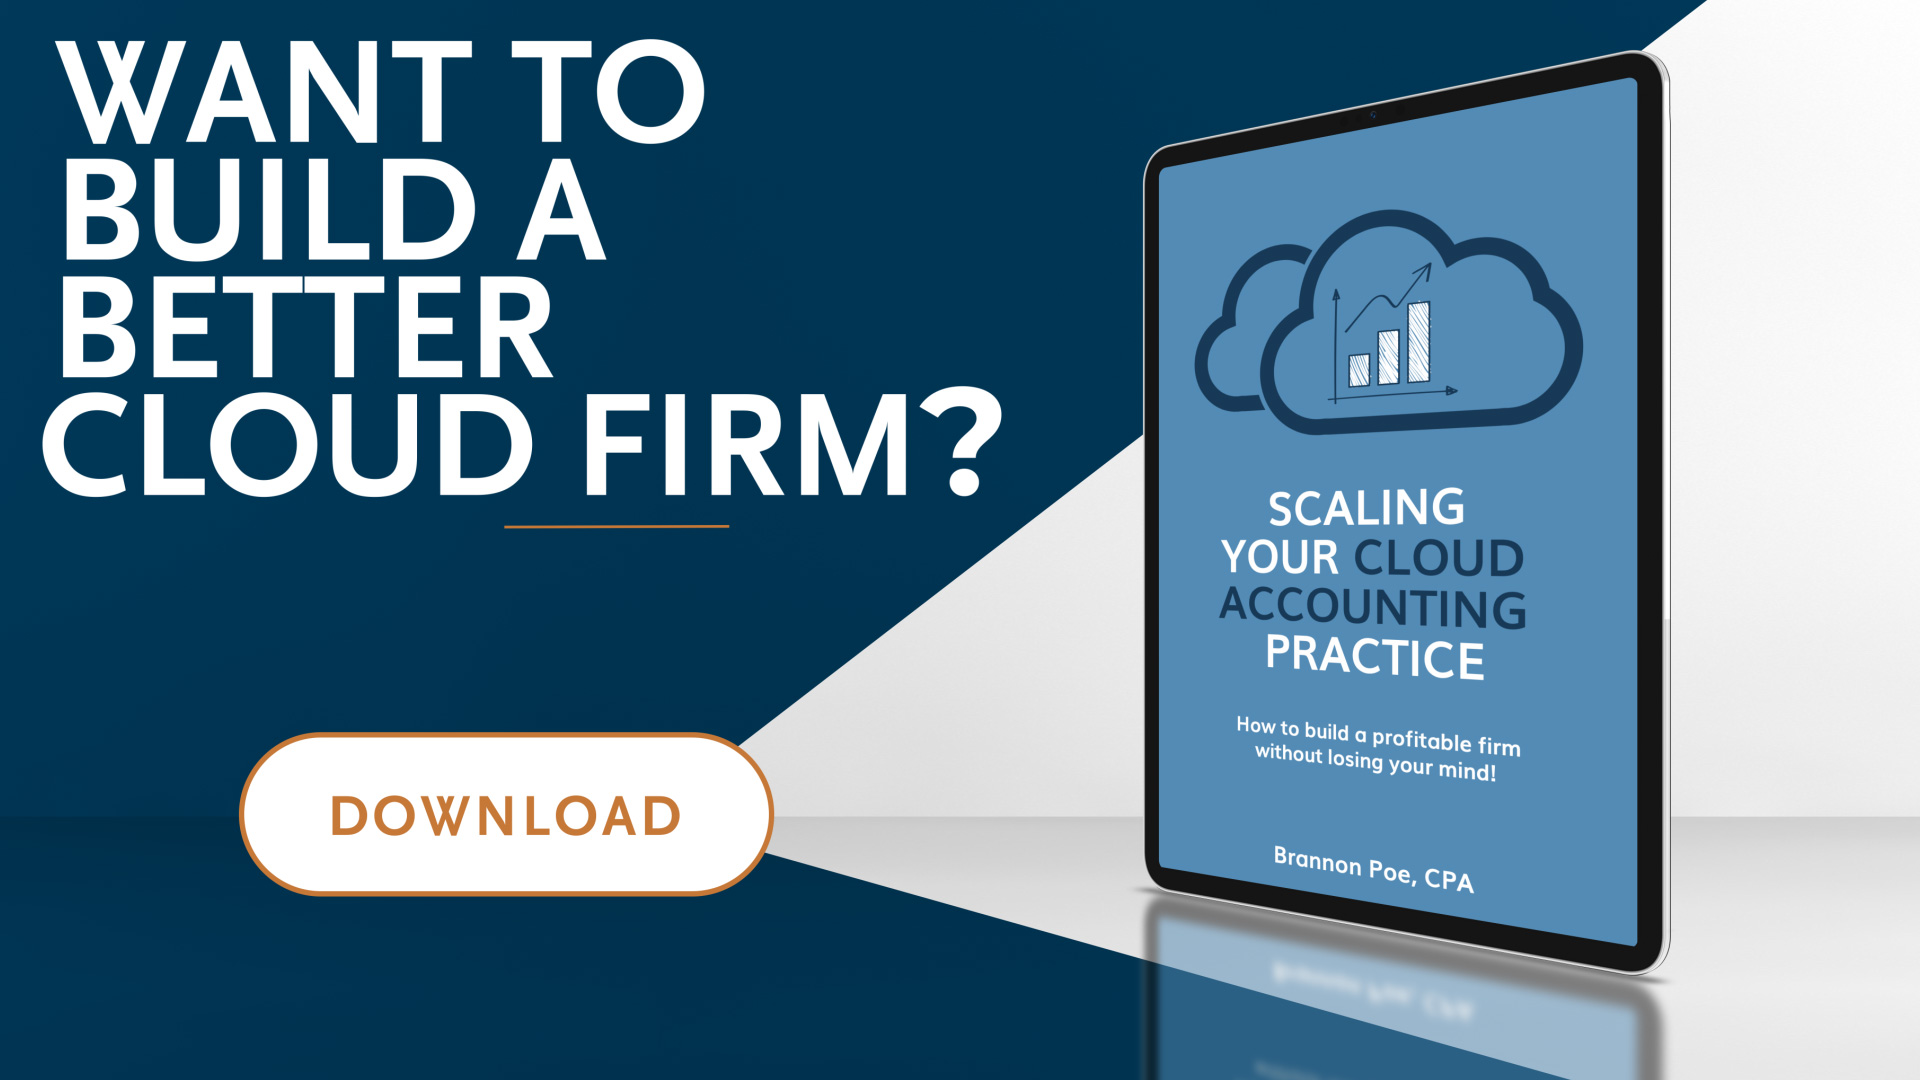 Scaling Your Cloud Accounting Practice